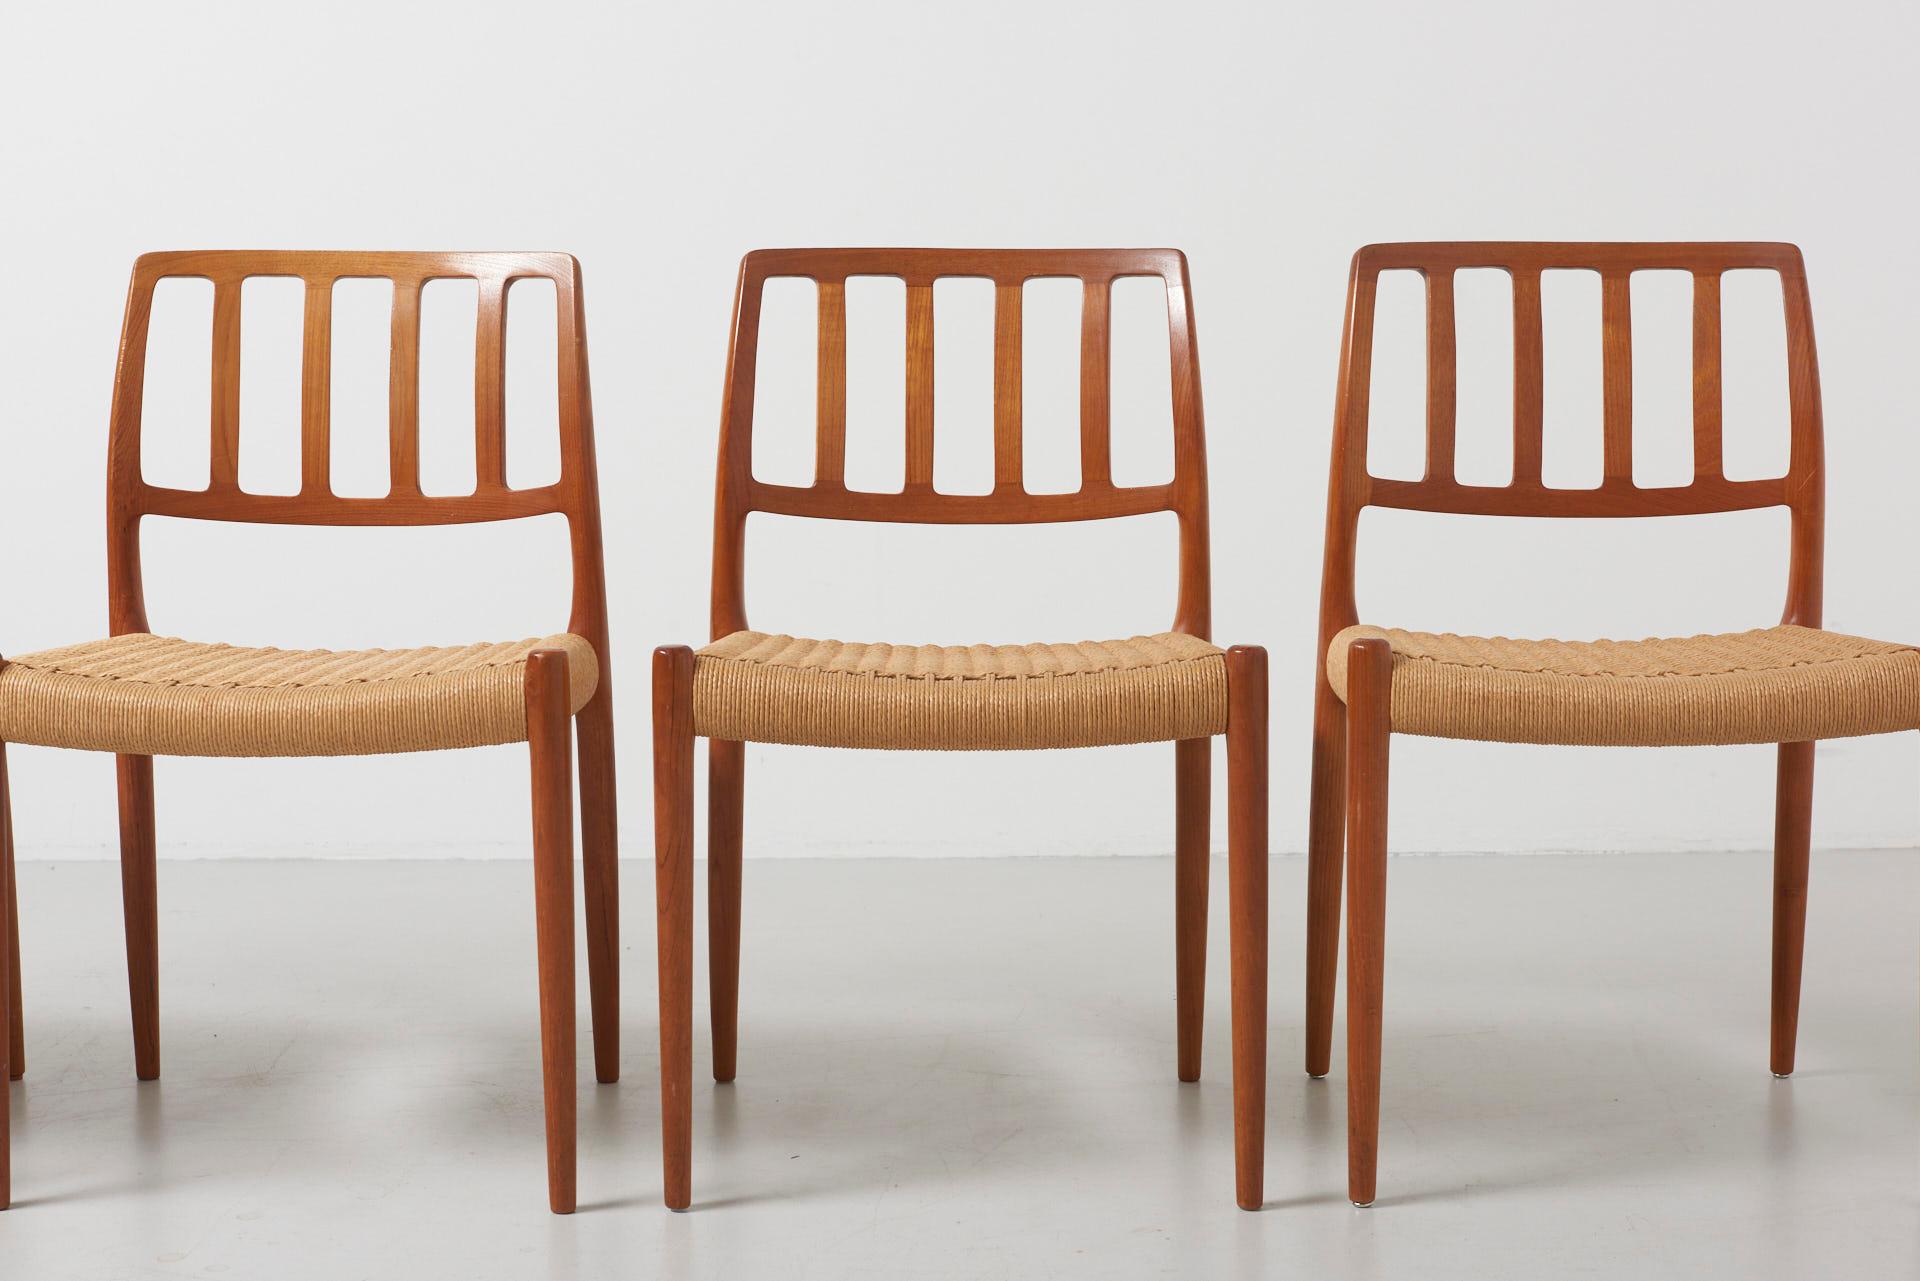 A set of 4 dining chairs in teak with original papercord.
Model 83 - designed in 1974 by Niels O. Møller.
Produced by J.L.Møller in Denmark.